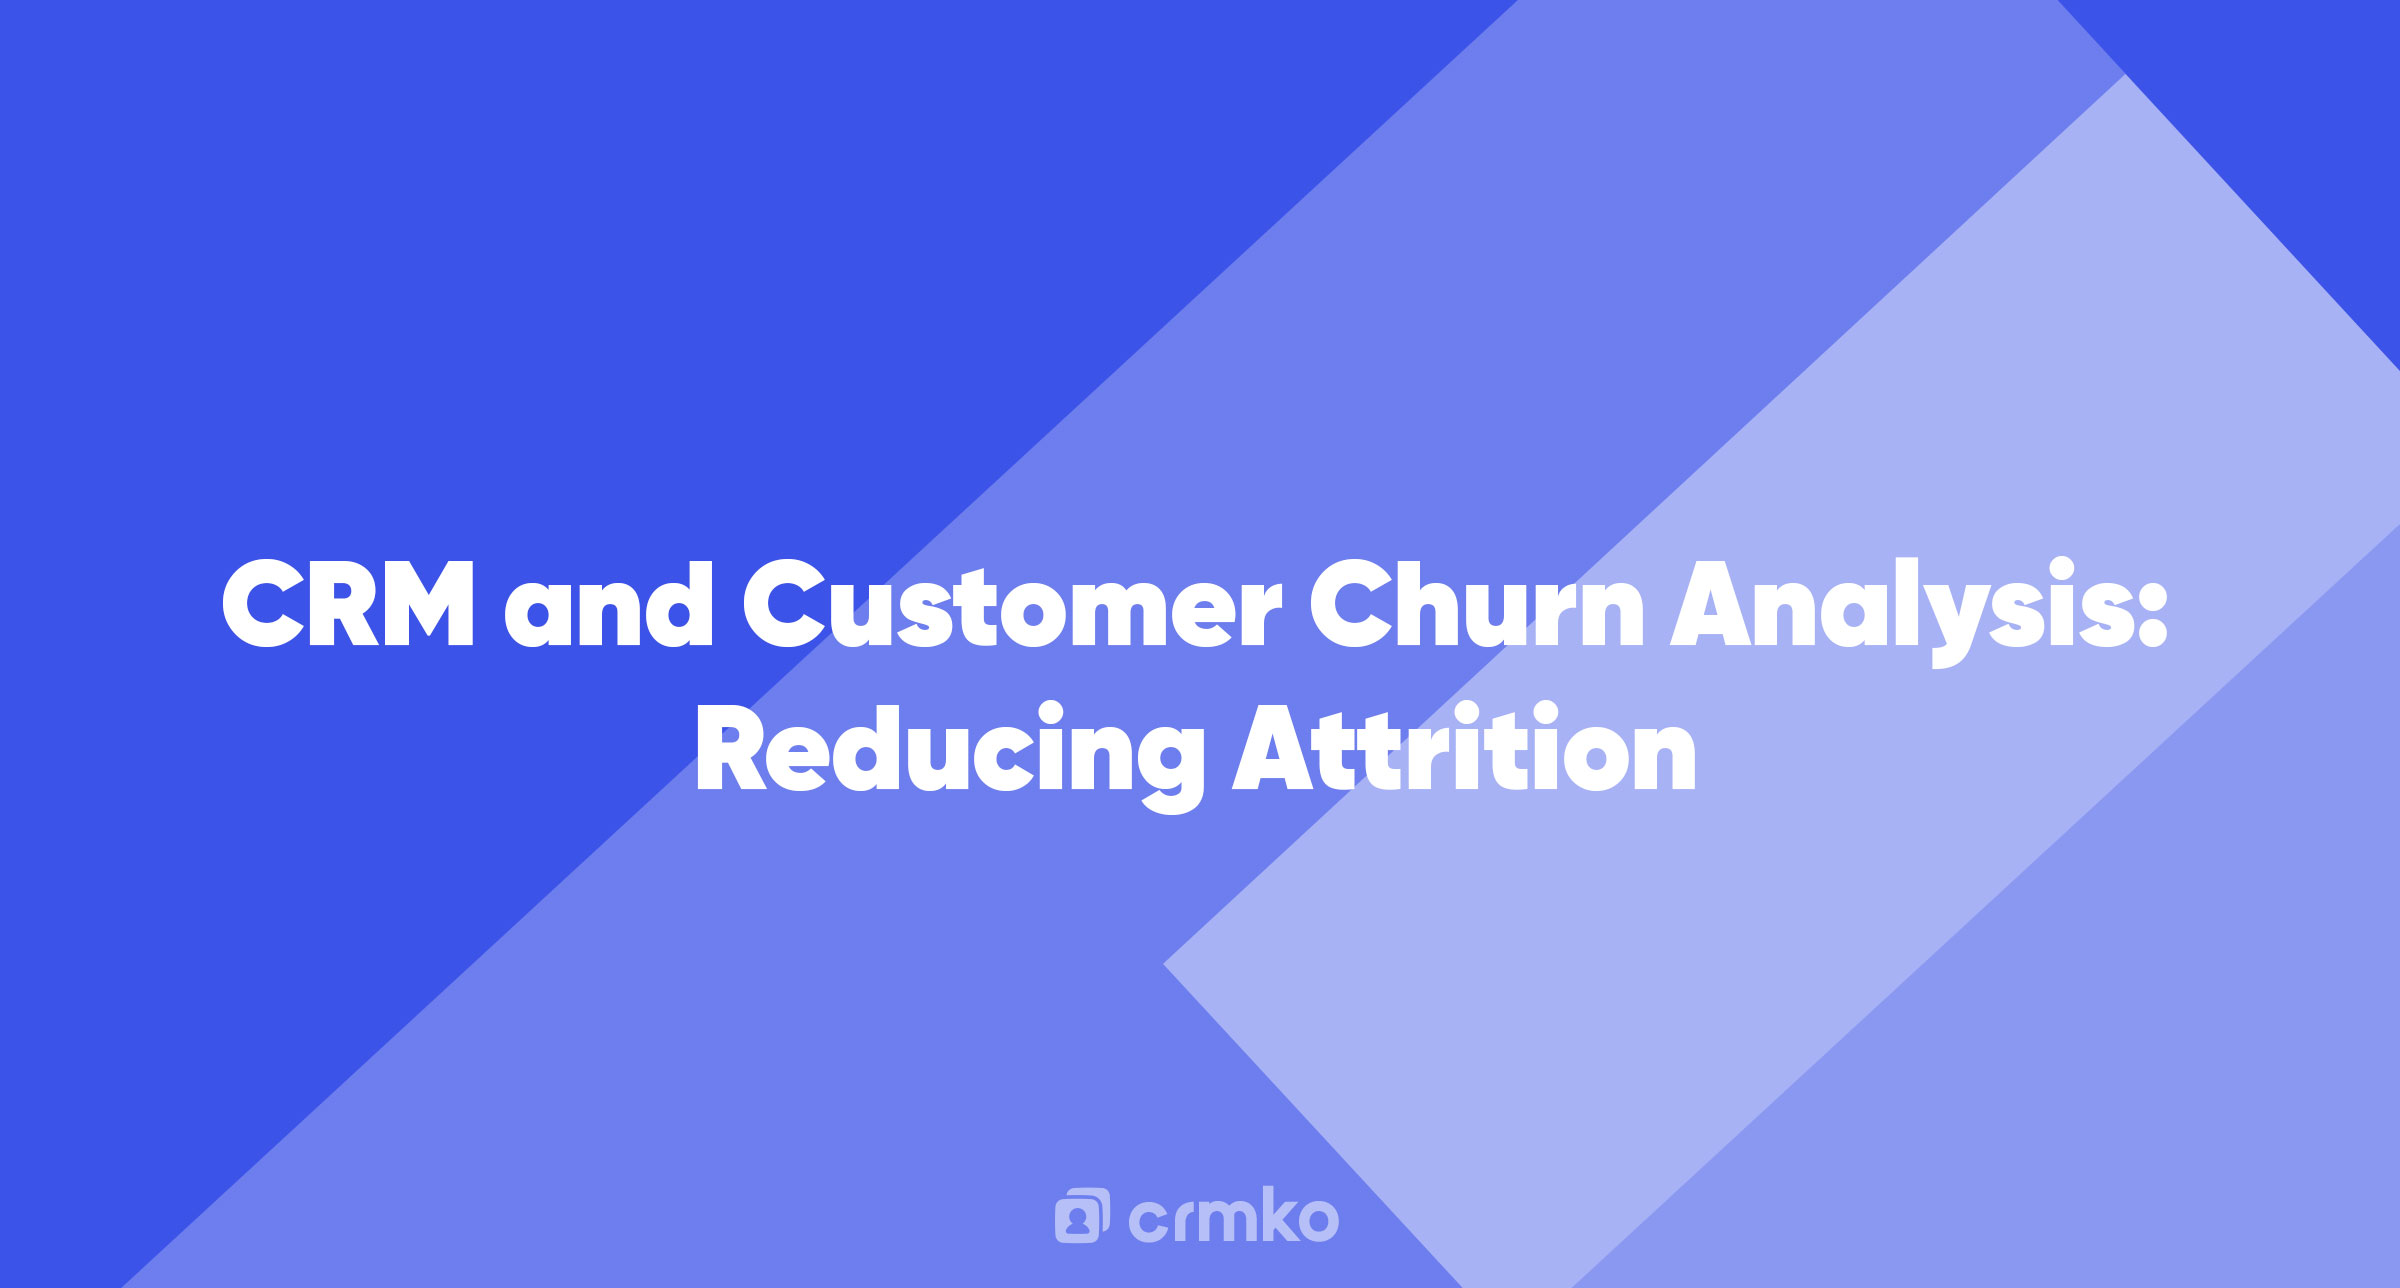 Article | CRM and Customer Churn Analysis: Reducing Attrition